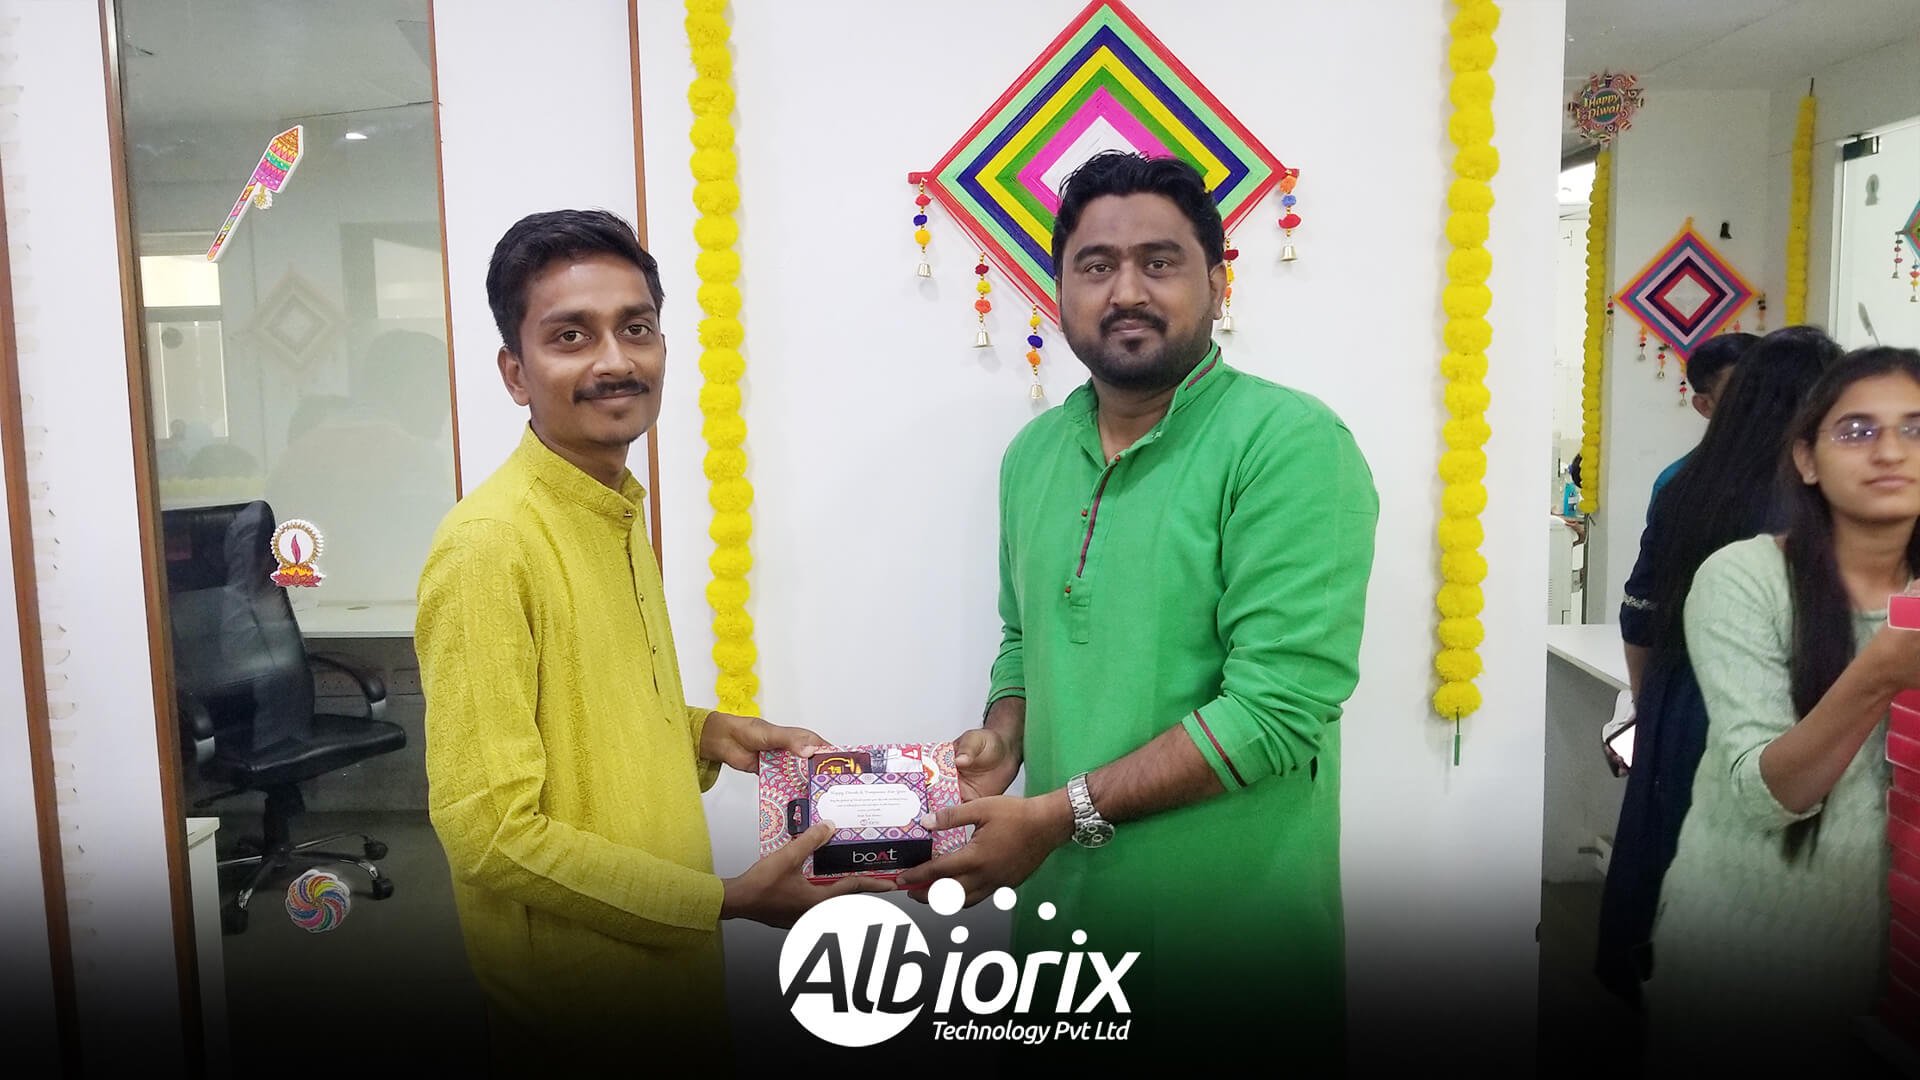 diwali gift and sweet from albiorix